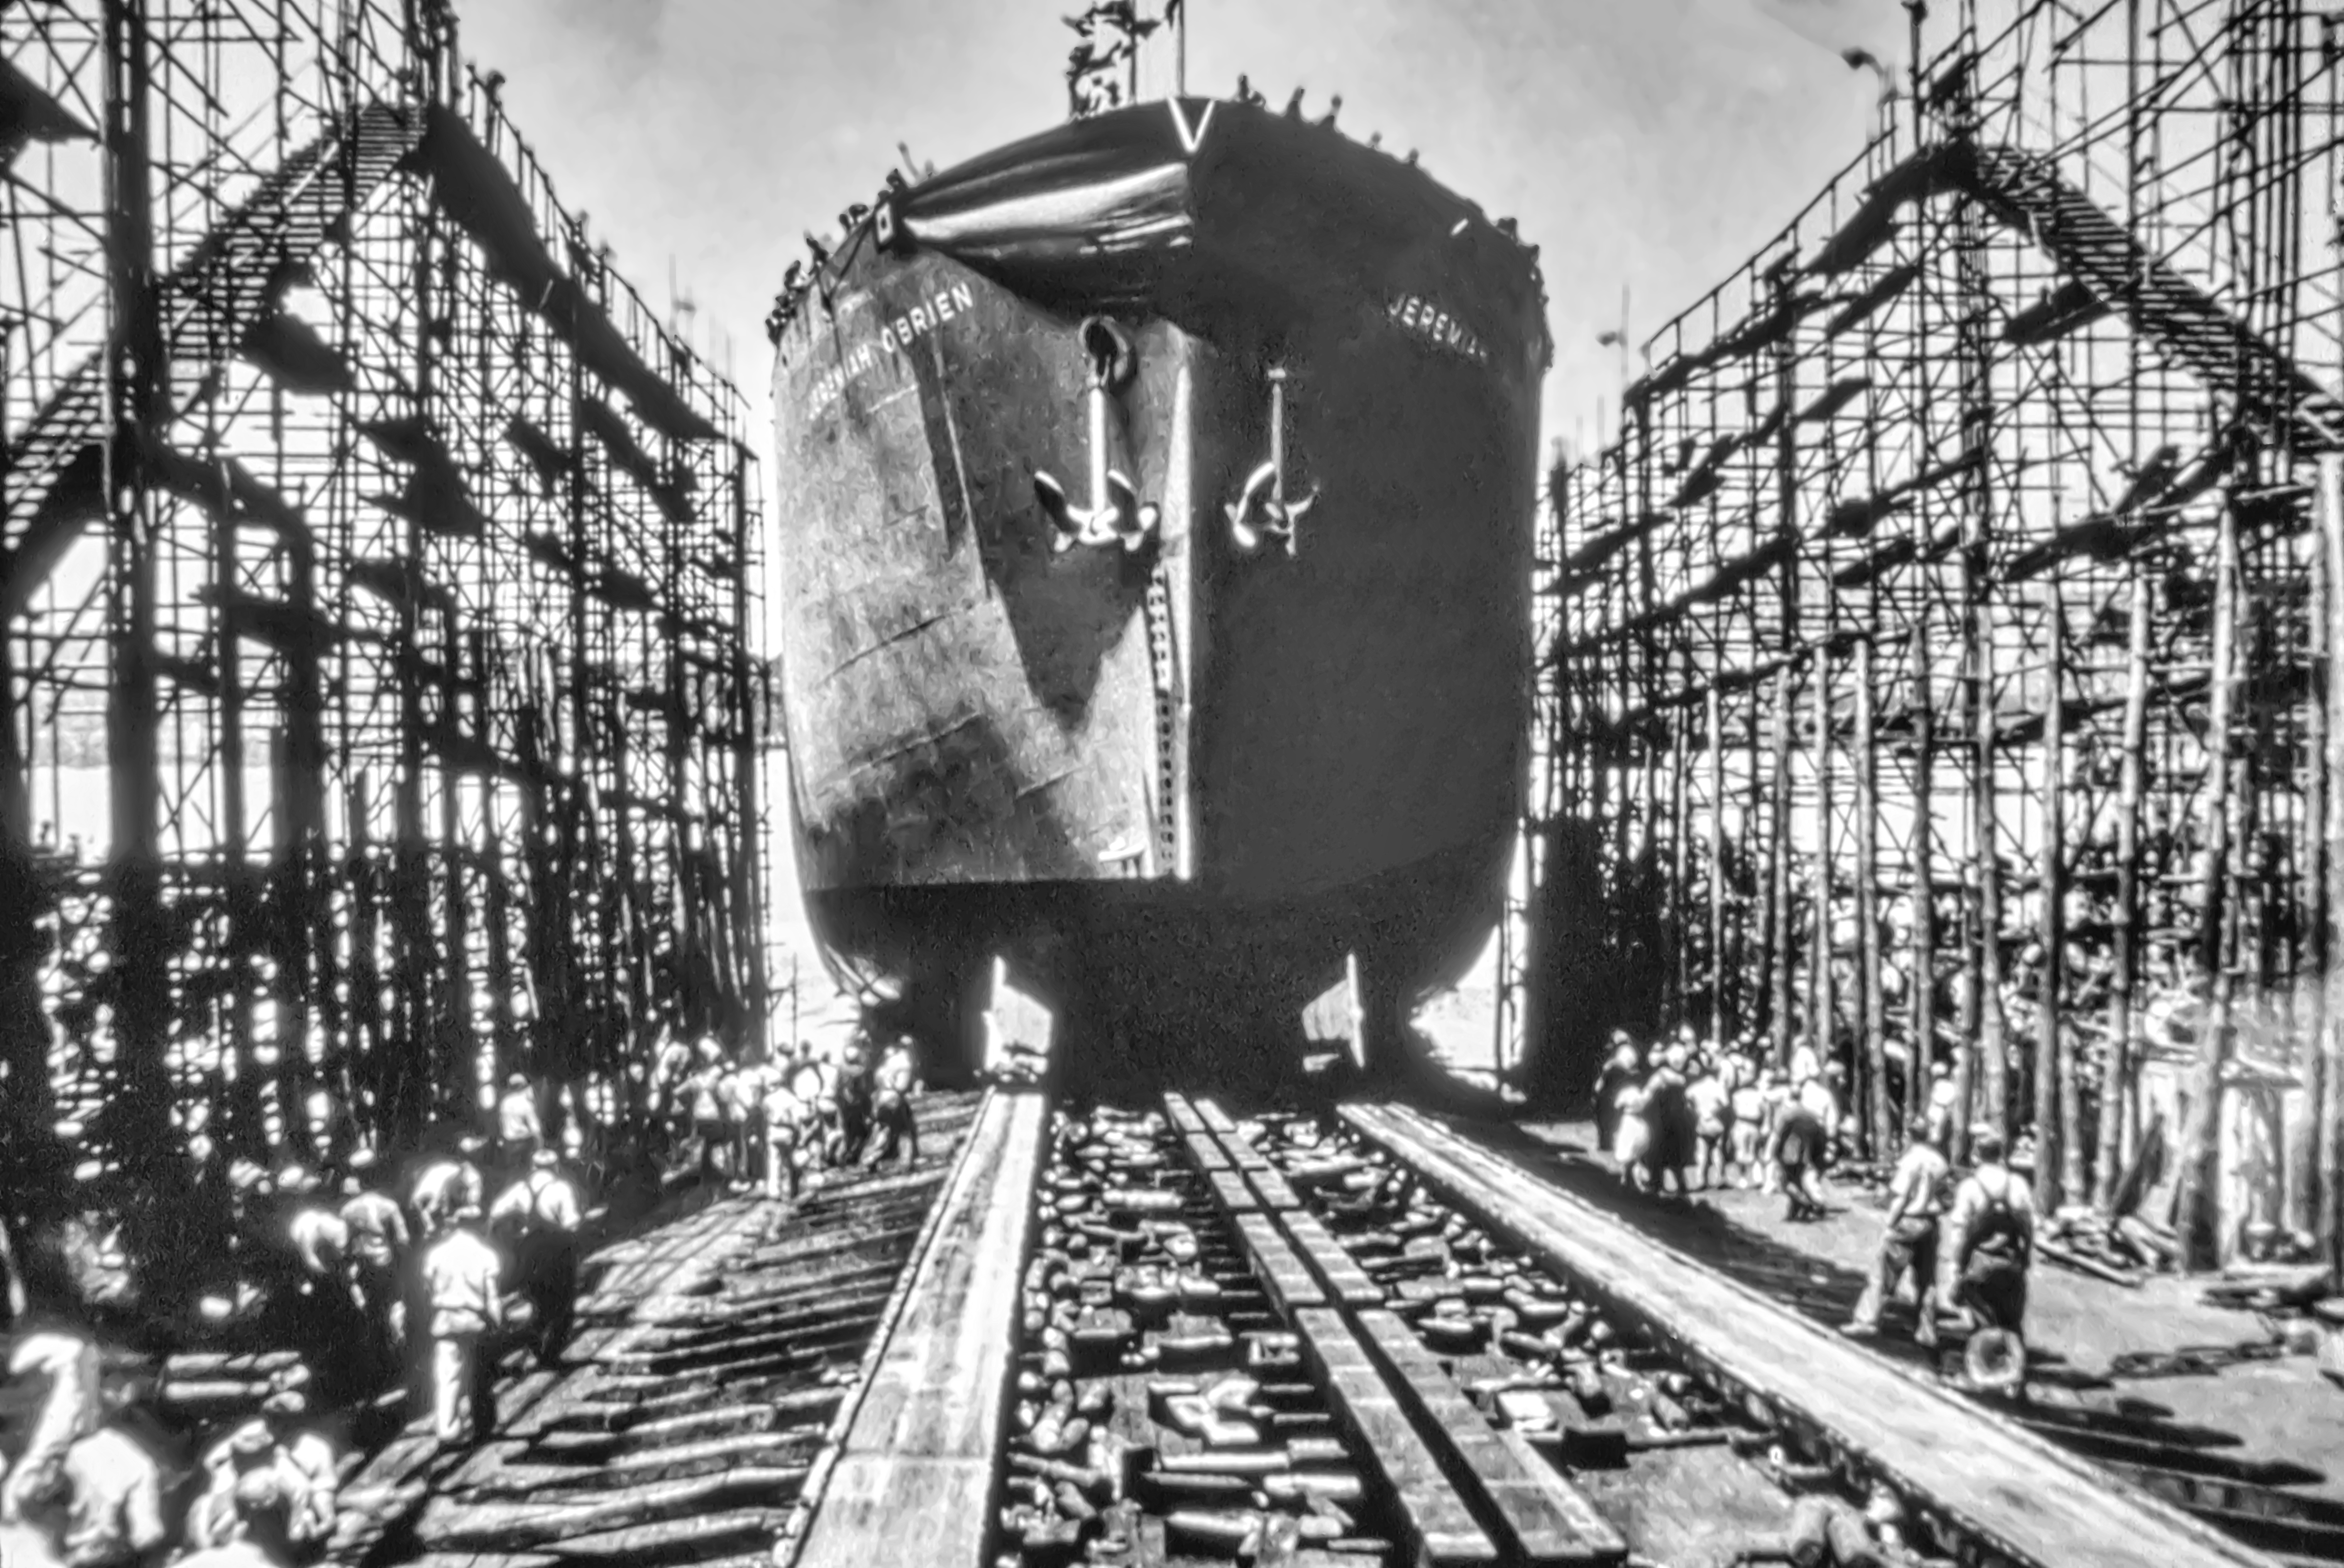 Black and white photo of construction of SS Jeremiah O'Brien